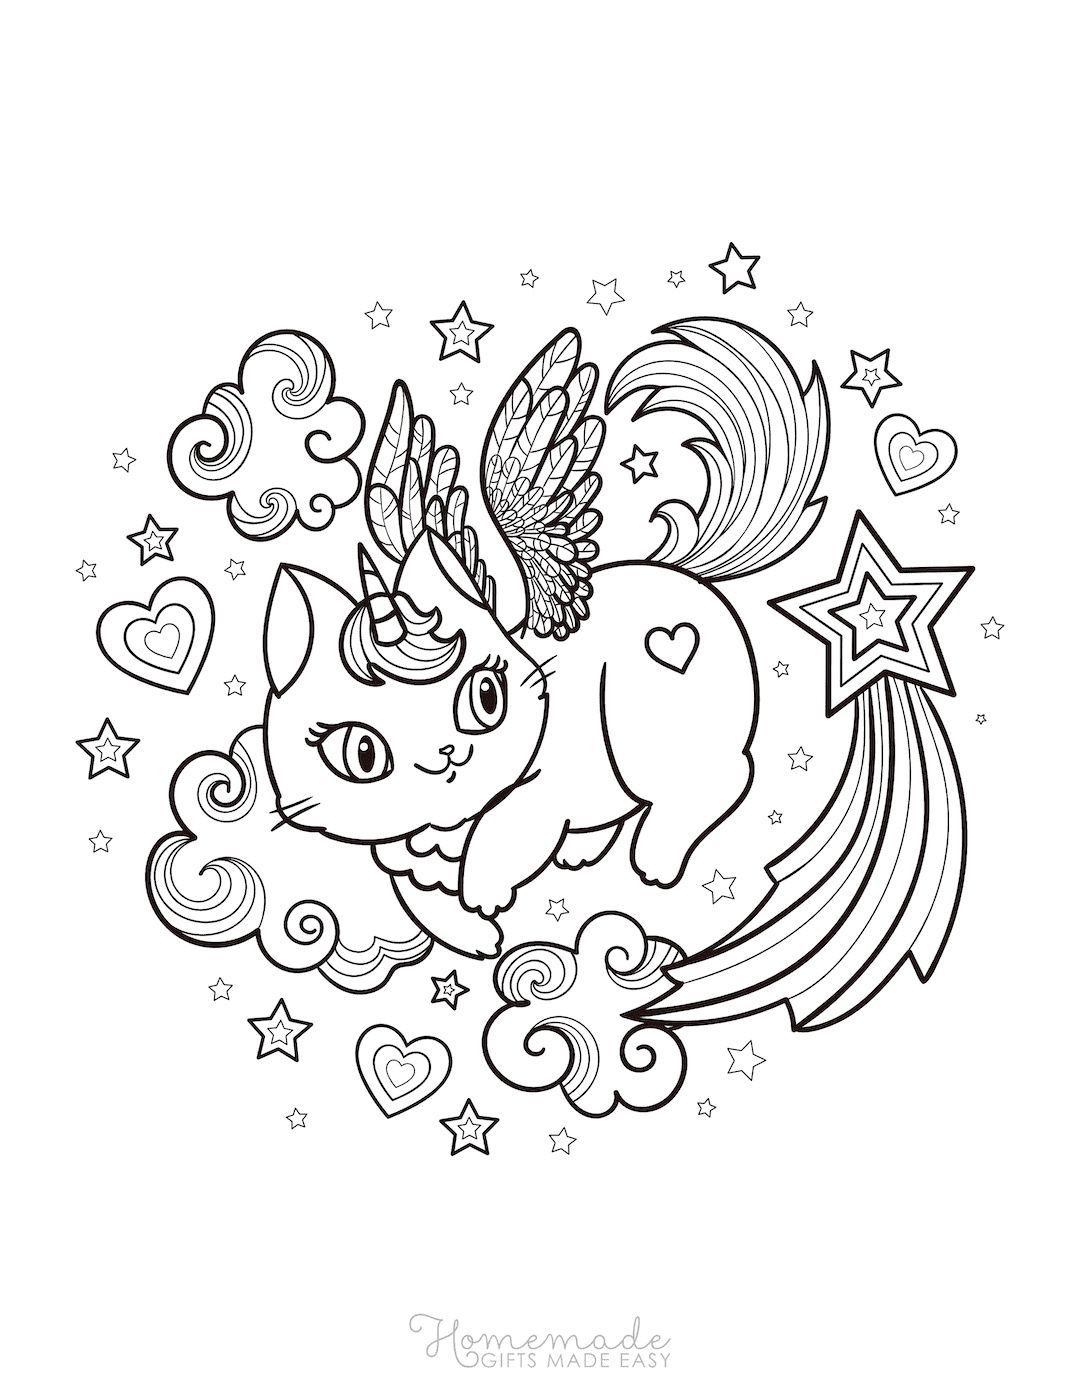 Caticorn Coloring Pages - Coloring Home